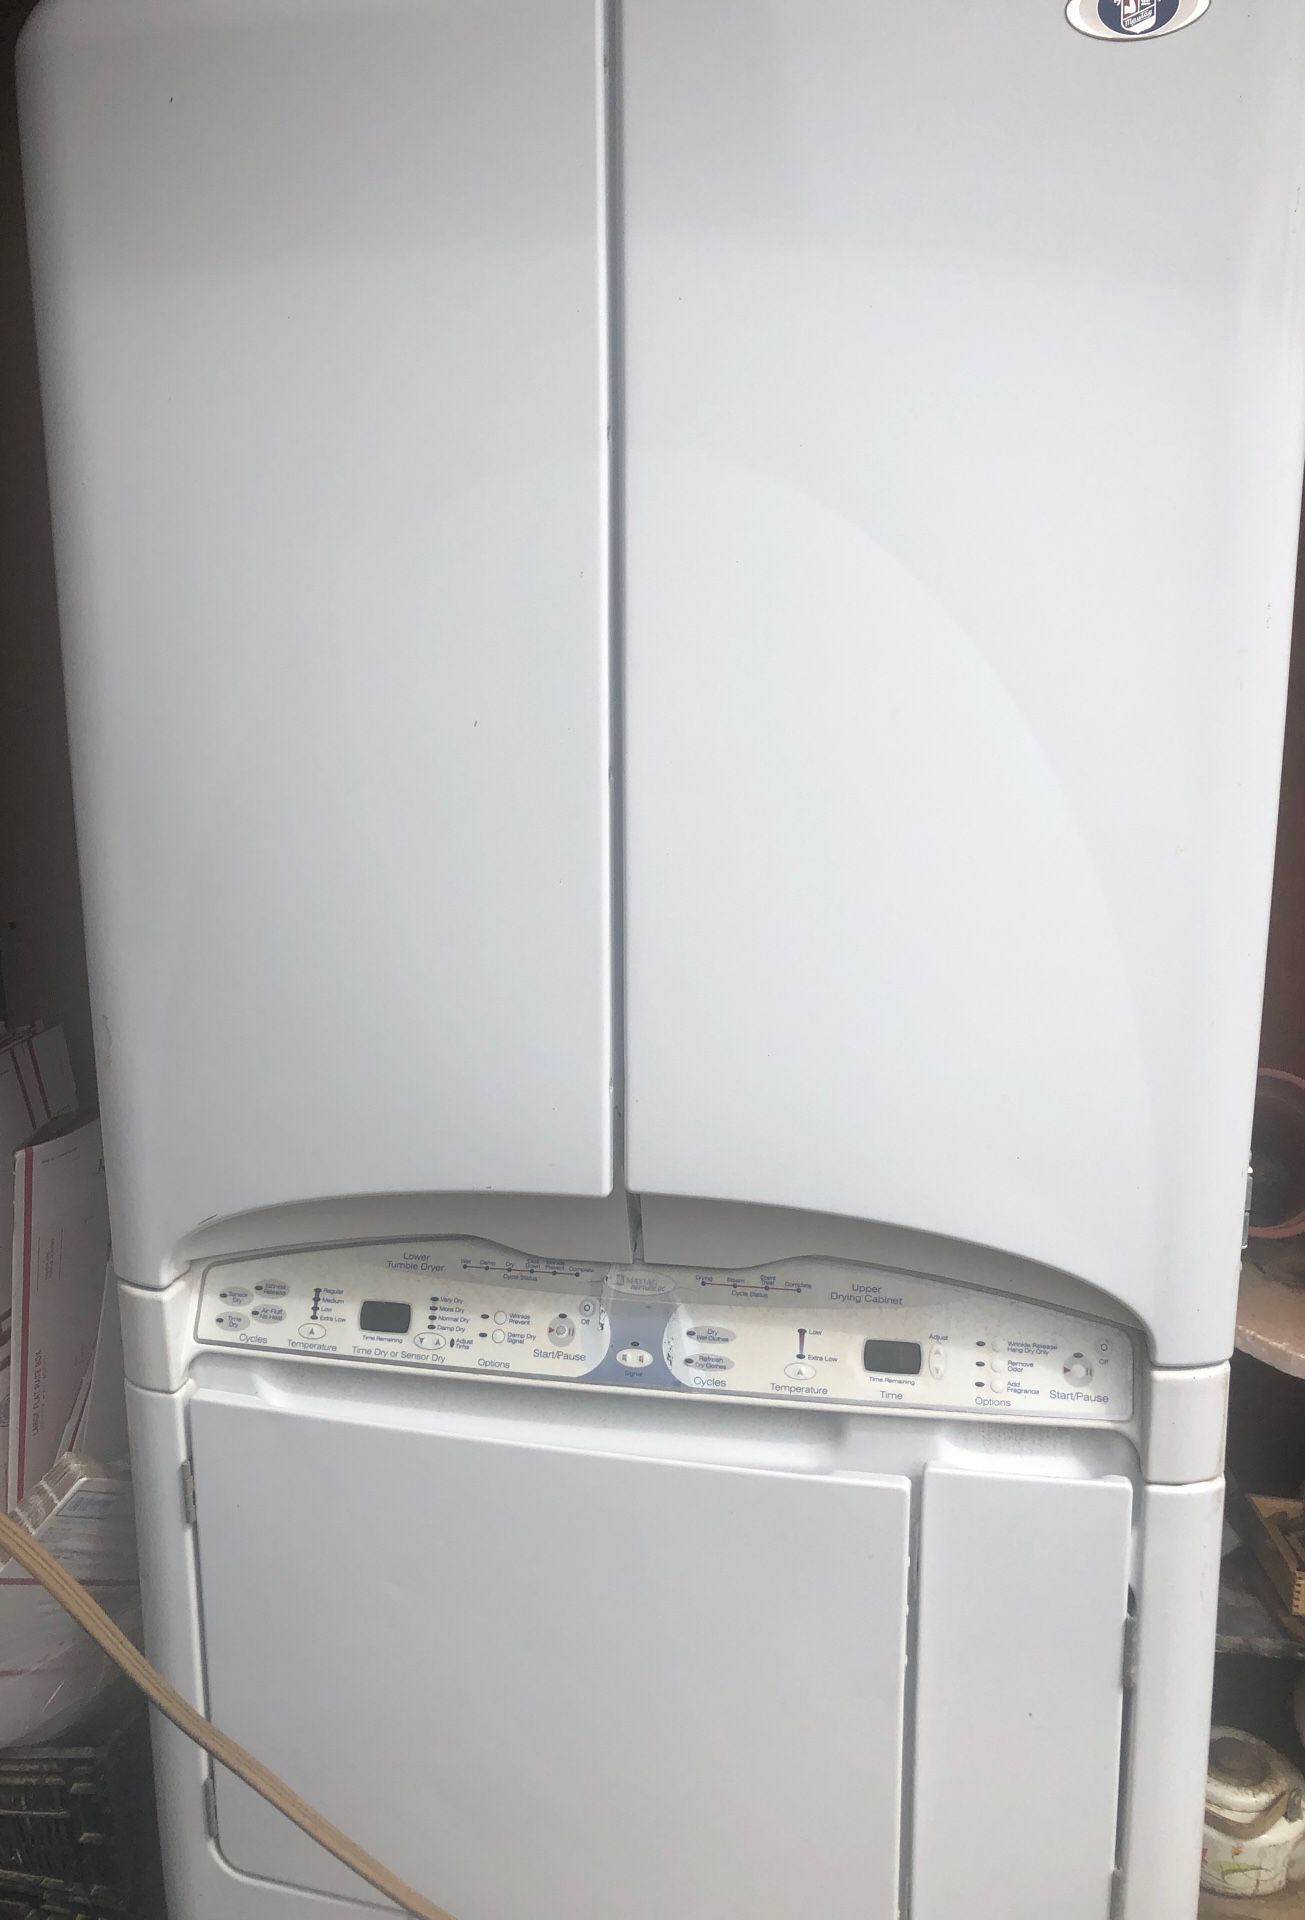 Maytag Neptune dc. Top is for dry cleaning , bottom regular dryer. Propane ready. Works great. 100